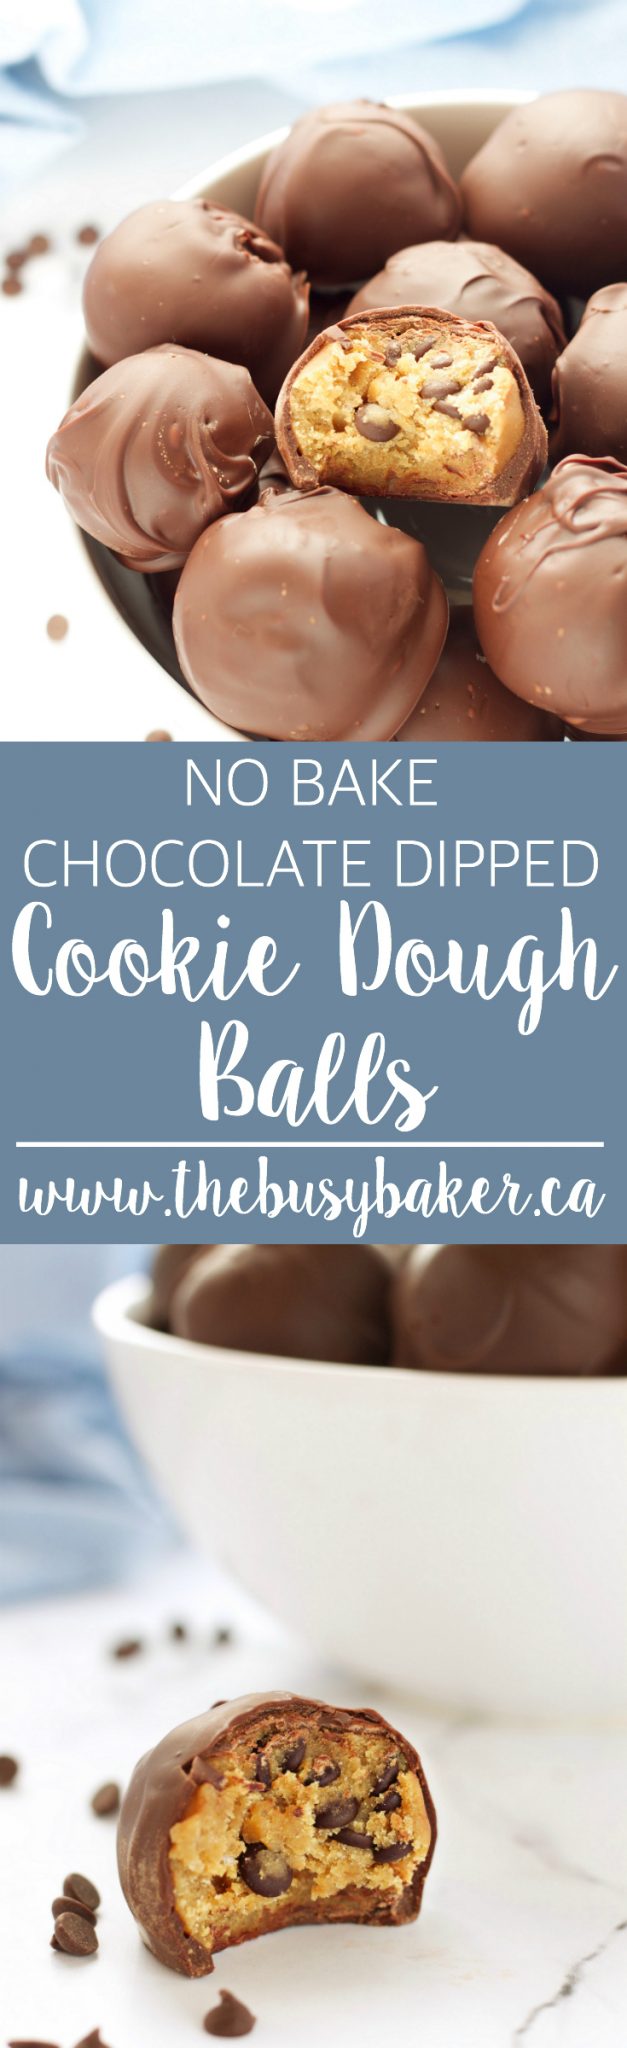 These No Bake Chocolate Dipped Cookie Dough Balls are an easy-to-make delicious treat perfect for a holiday cookie tray or any time of the year! Recipe from thebusybaker.ca! via @busybakerblog